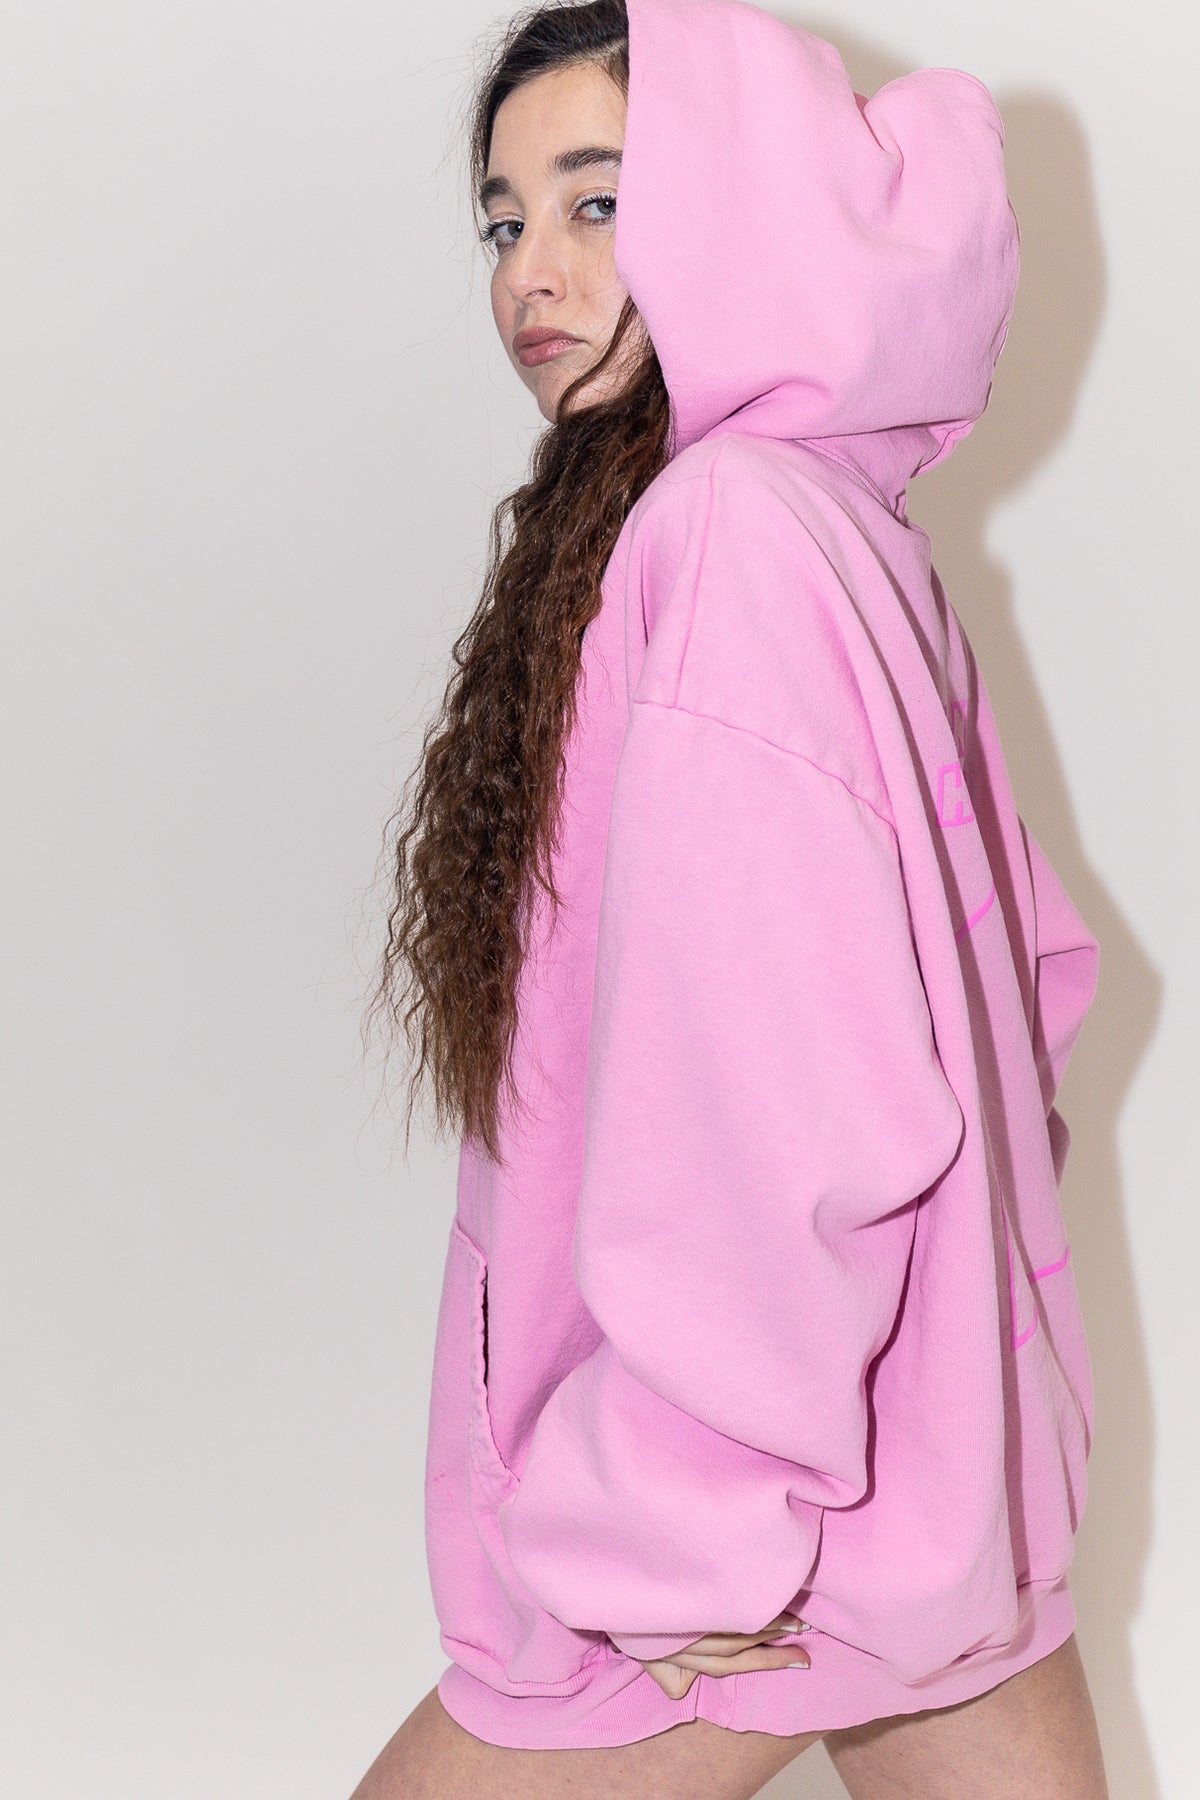 Bunny Holiday PPP Hoodie 1